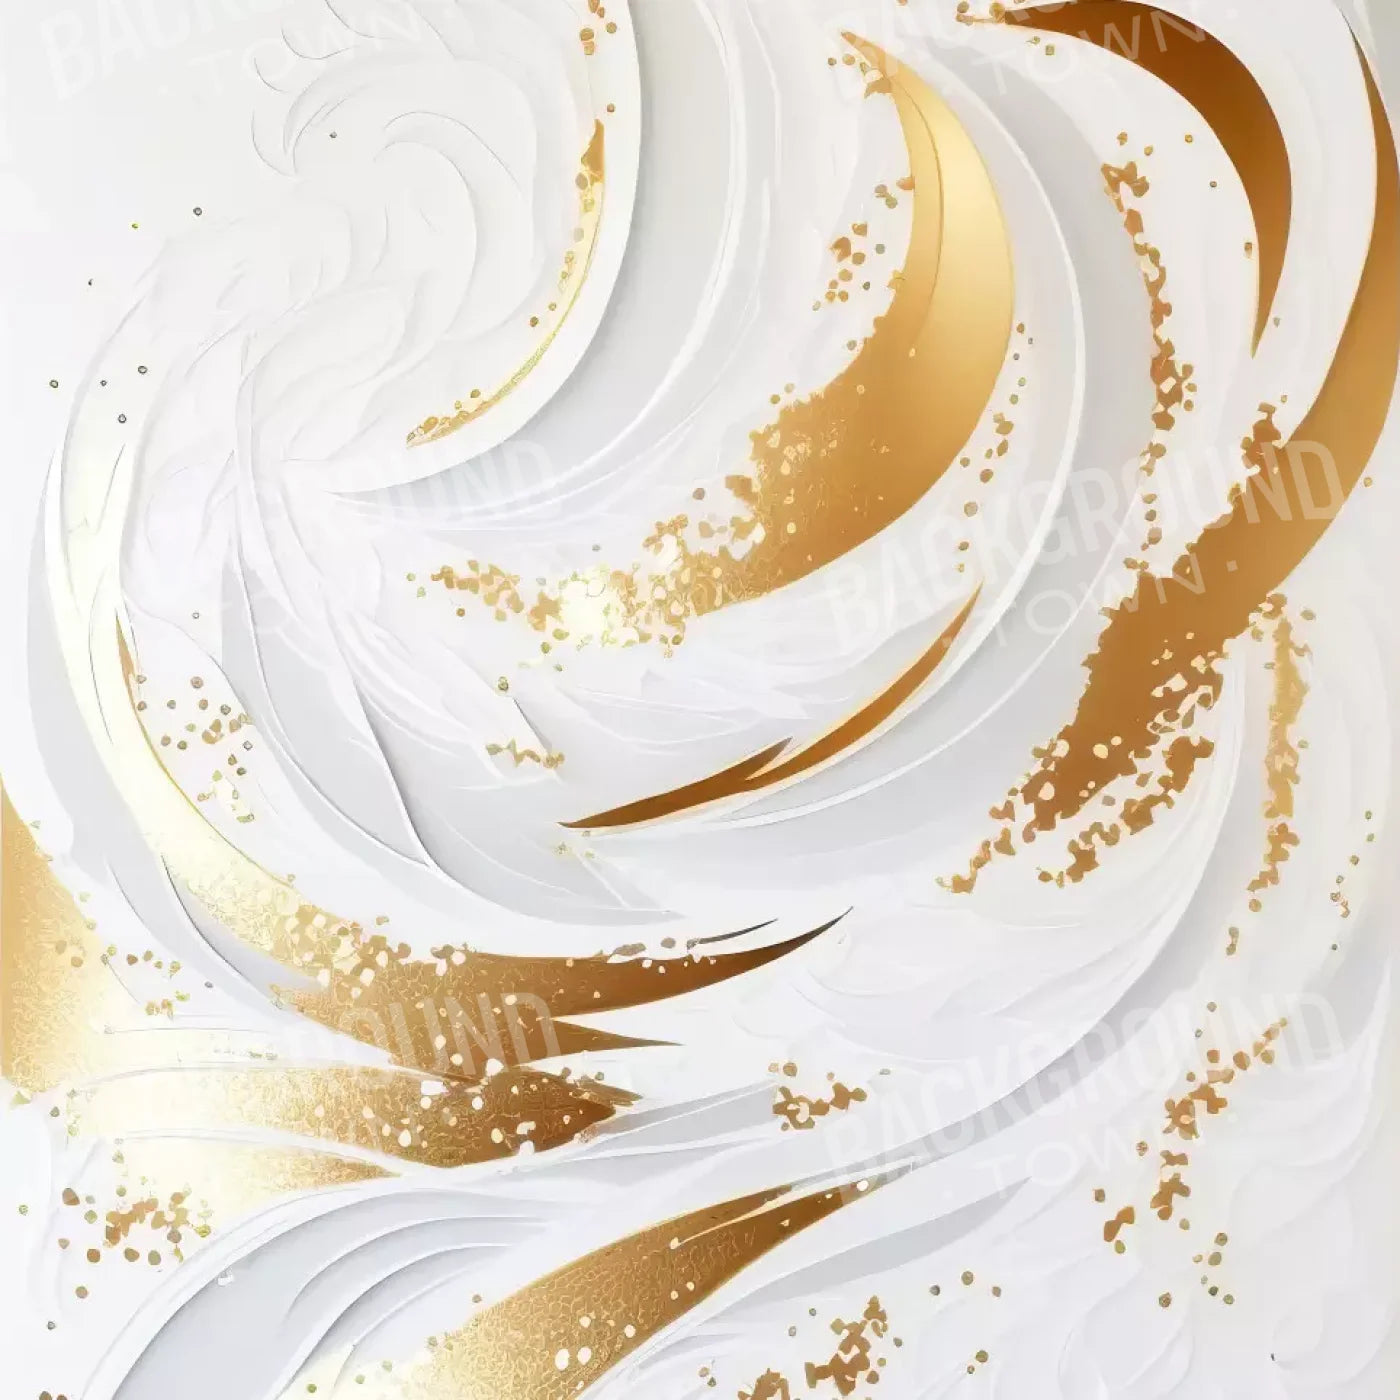 Abstract Swirl In White And Gold 8X8 Fleece ( 96 X Inch ) Backdrop